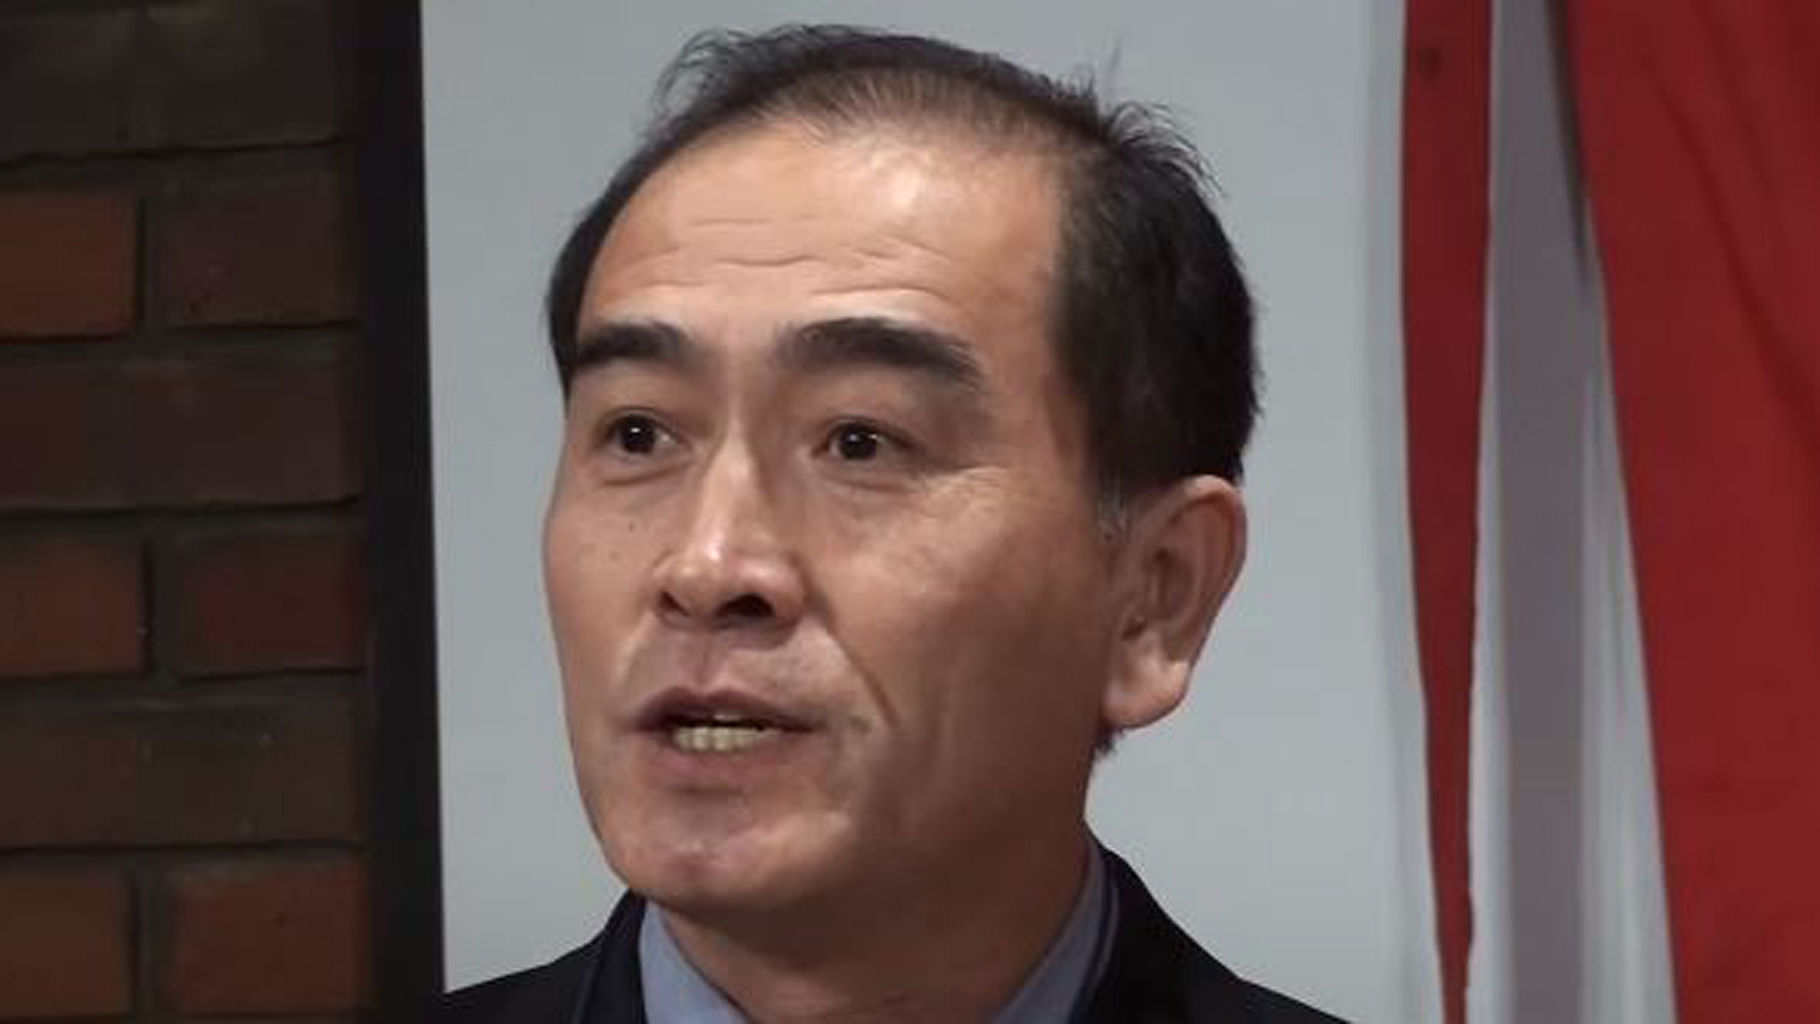 Thae defected due to discontent with the regime of Kim Jong Un in North Korea. (Photo Courtesy: Youtube/ <a href="https://www.youtube.com/watch?v=bdcLDhOQSos">Proletarian TV</a>)